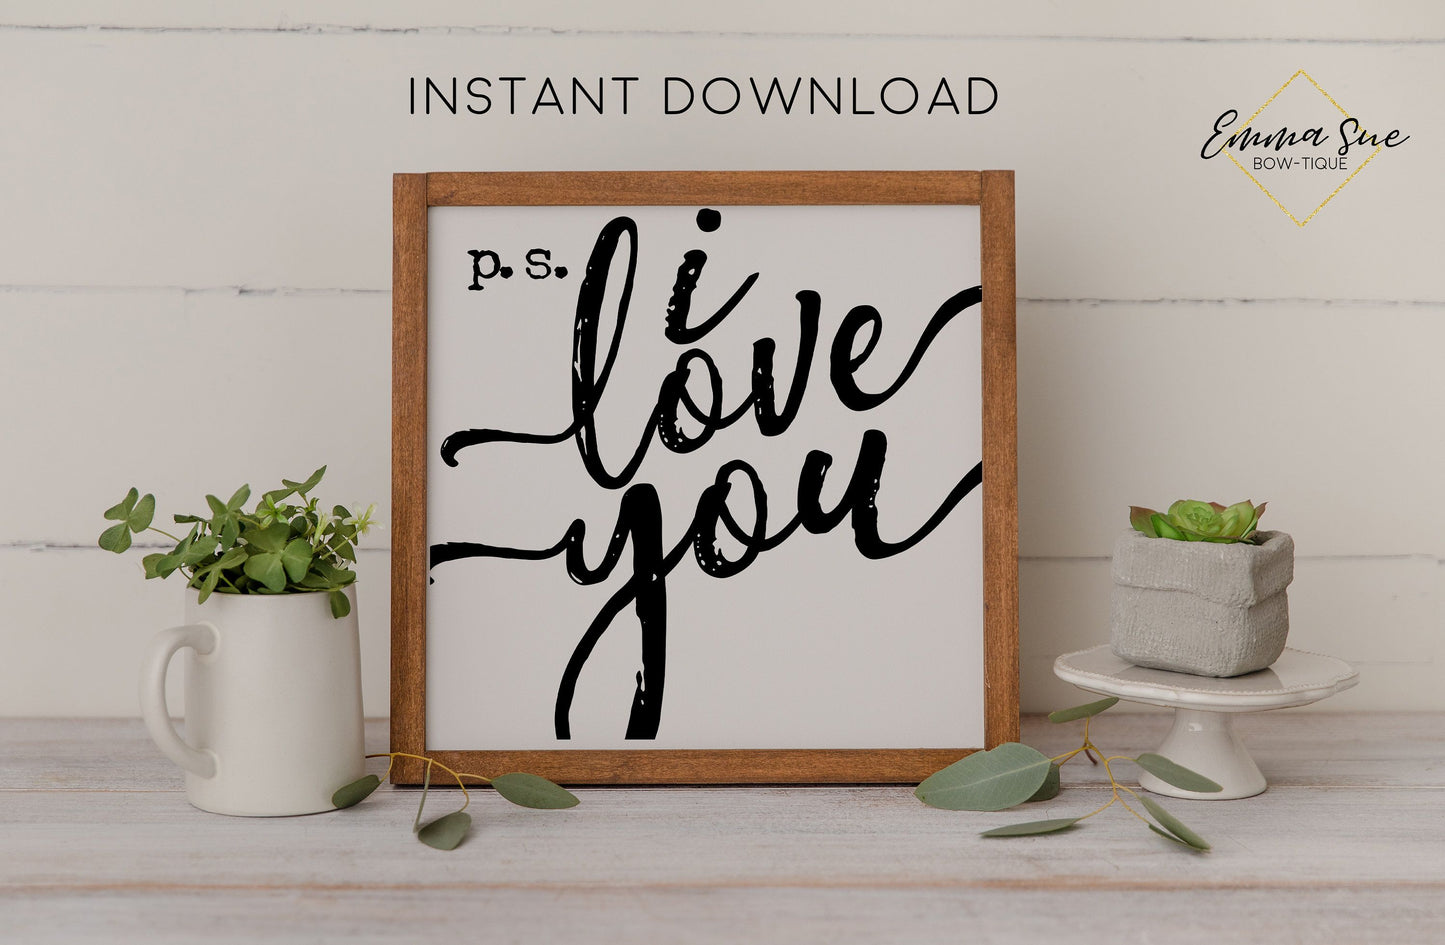 P.S. I love you - Love Quotes Farmhouse Printable Sign Wall Art - Digital File